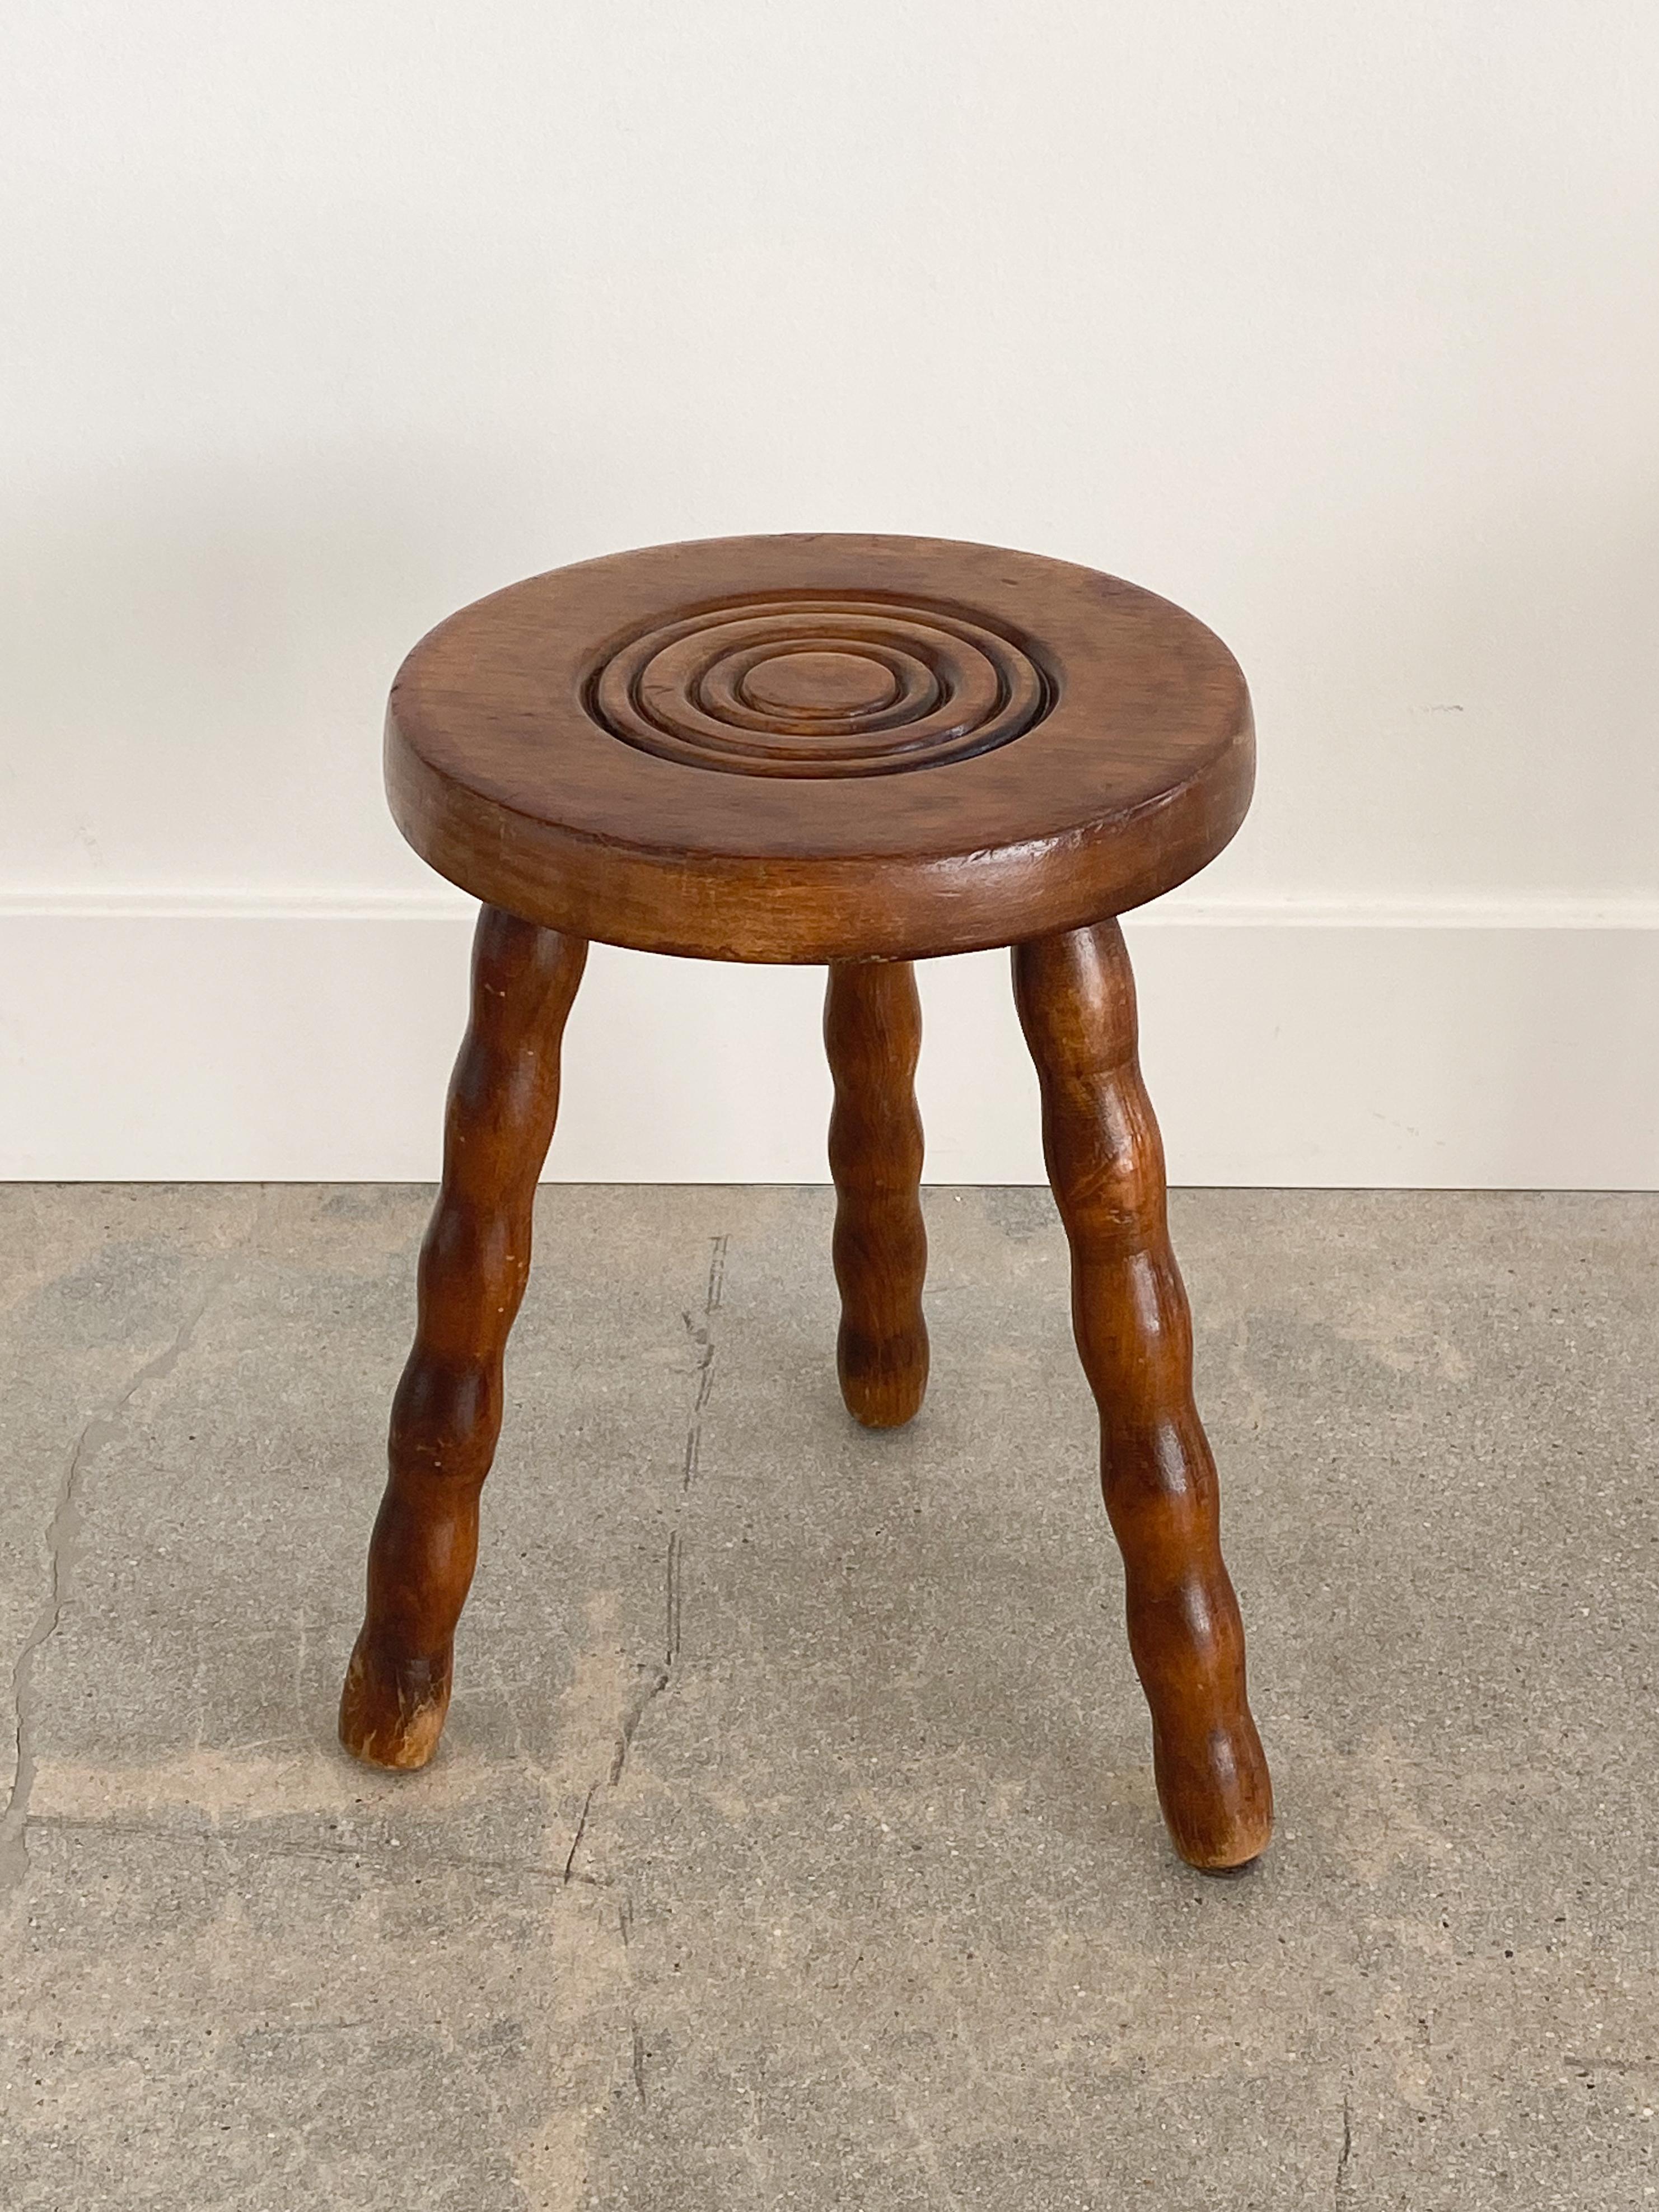 Vintage wood stools with beautiful wavy wood legs from France. Circular seats each with unique carved ring detail. Original wood finish with great age markings and patina. Can be used as small stools or as side tables next to chairs. Price is for a